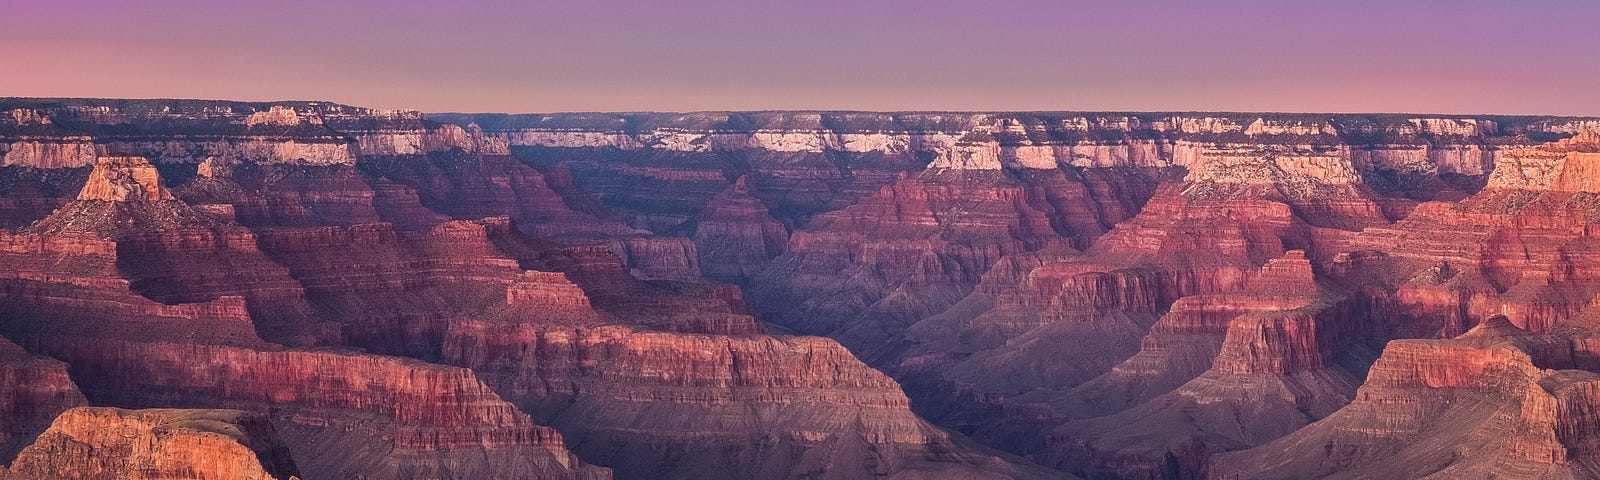 Picture of Grand Canyon at sunrise